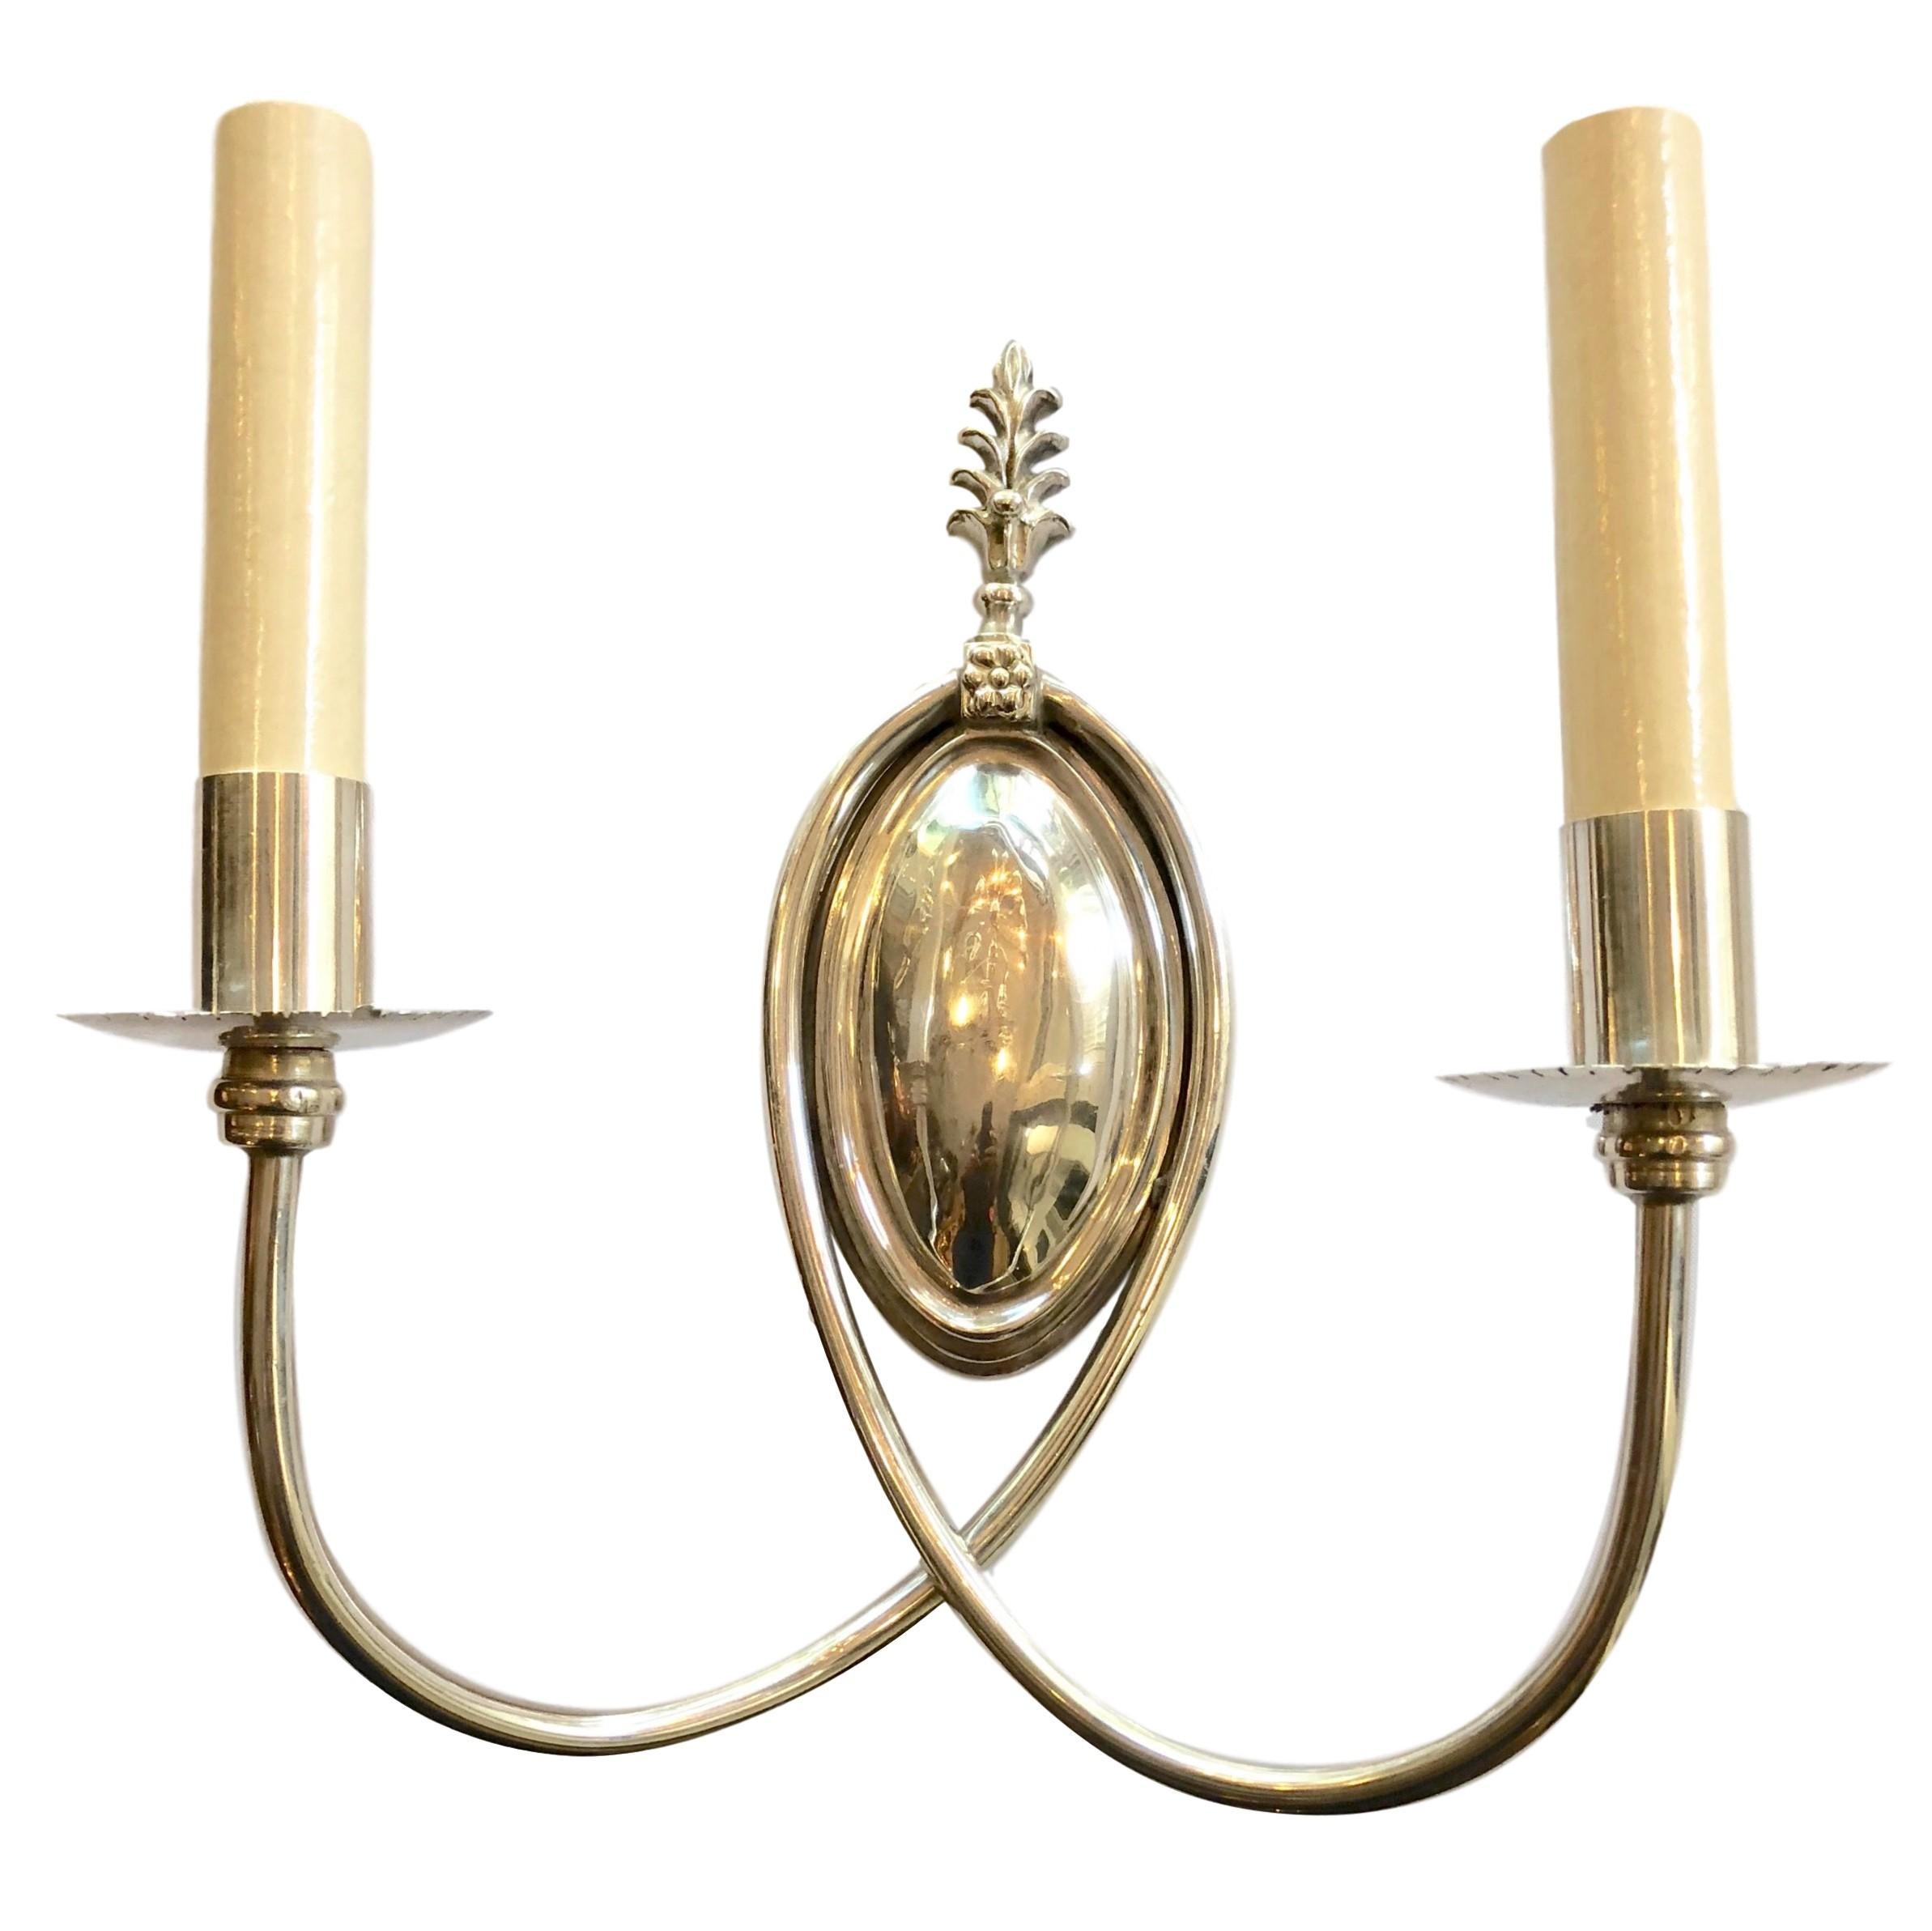 A pair of circa 1920s English silver-plated two-arm sconces.

Measurements:
Height 10